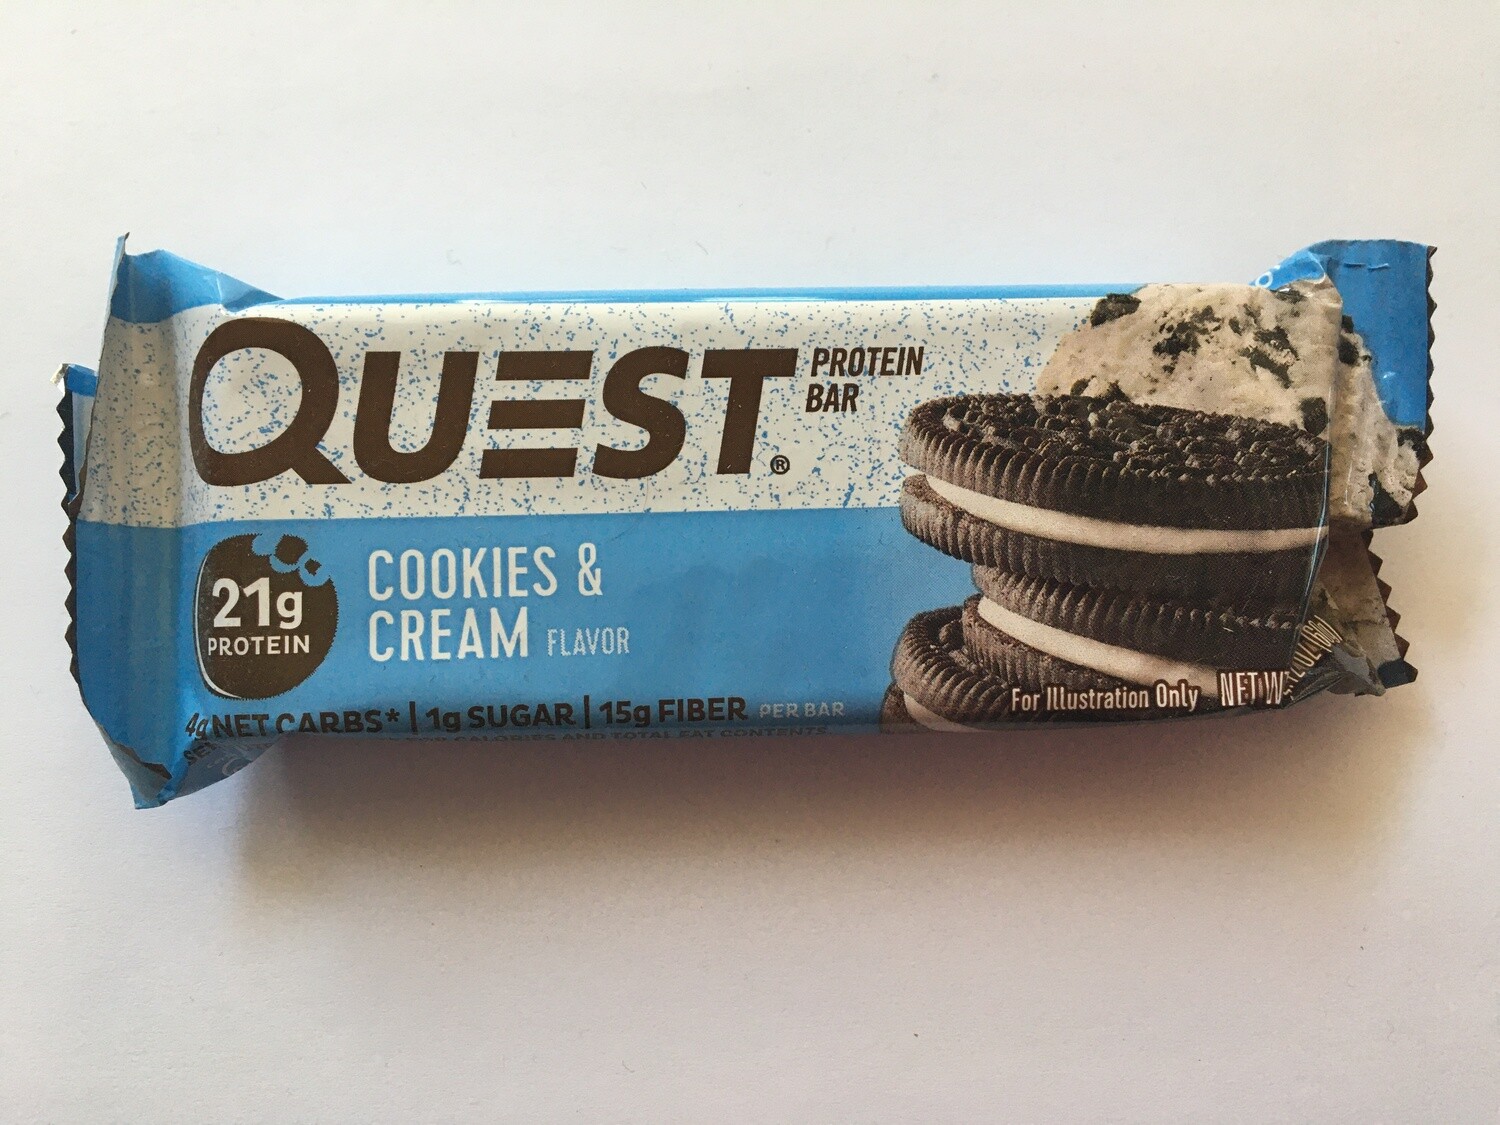 Snack / Bar / Quest Bar Cookies and Cream